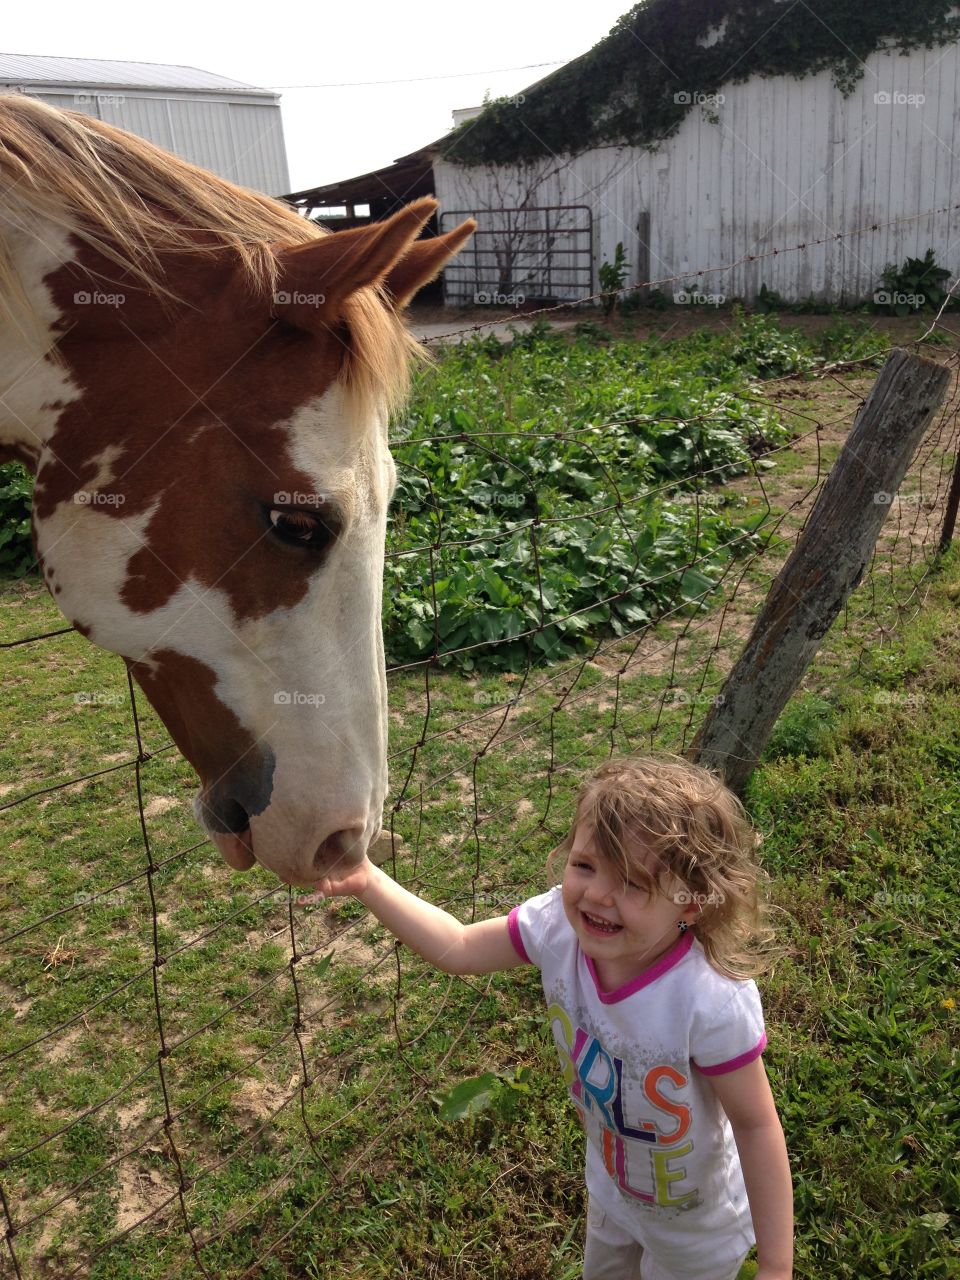 Our buddy Cody. Time for treats.. My daughter feeding our quarter horse paint gelding